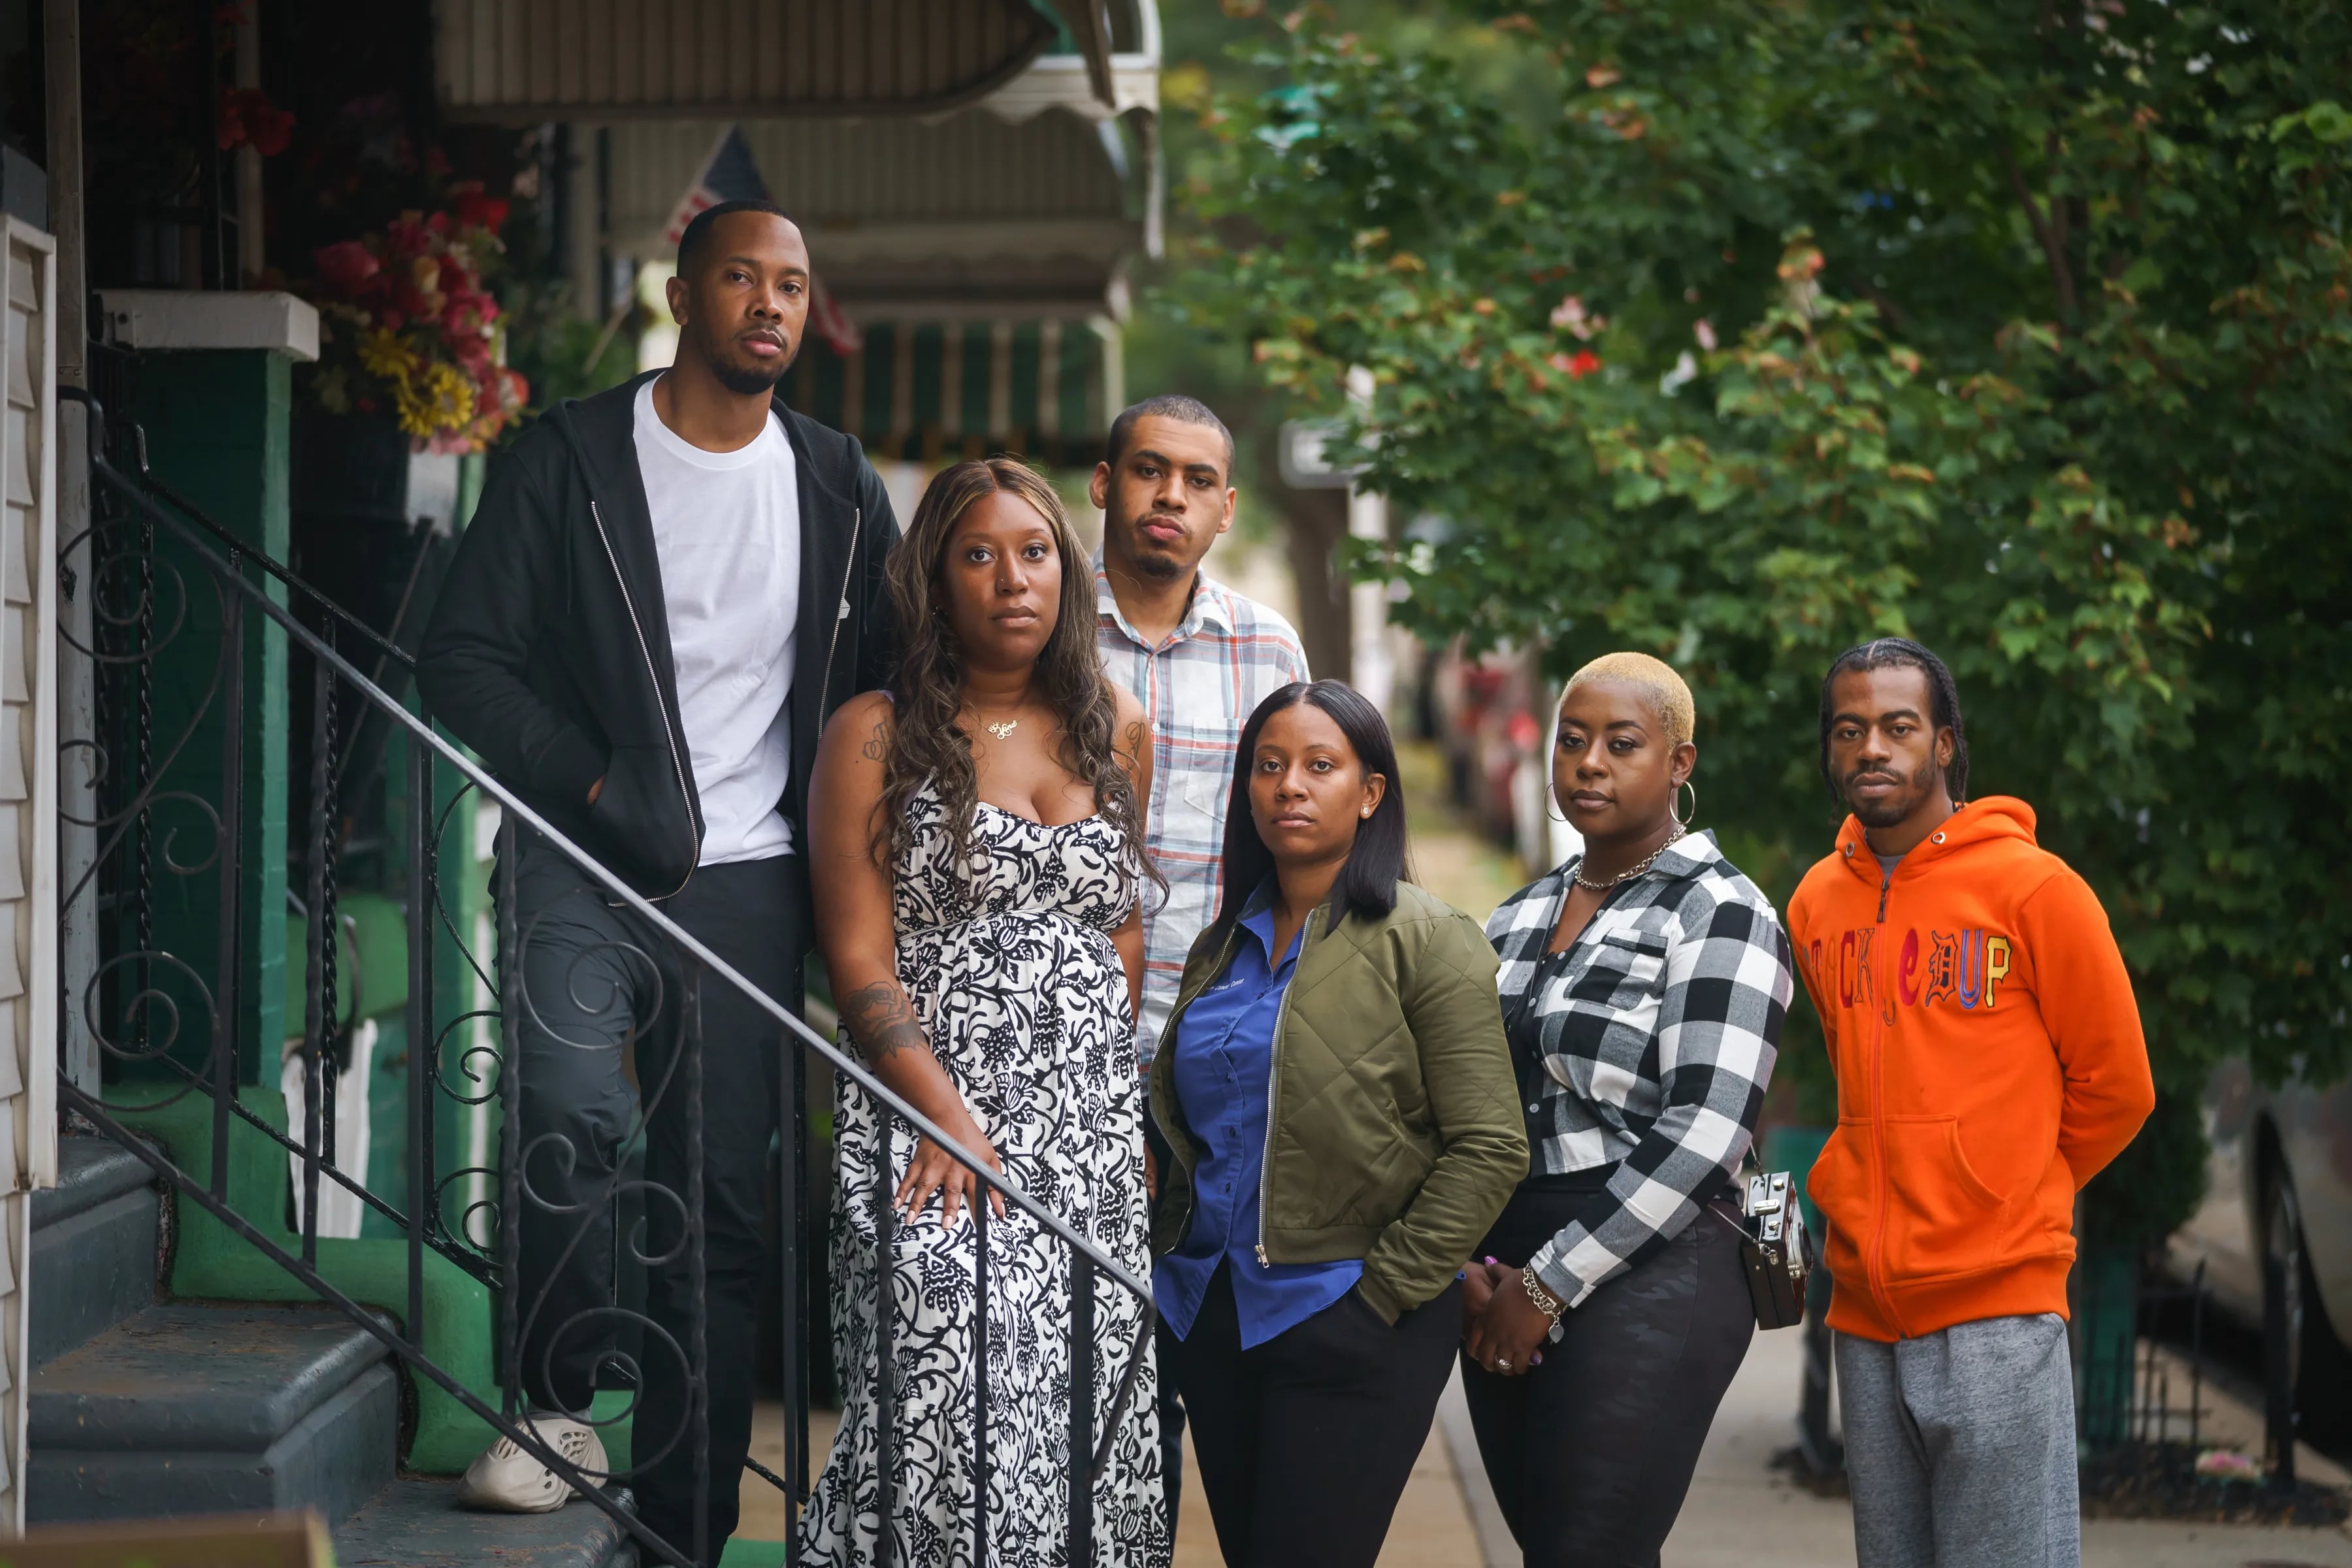 Donyell Paddy's children, who grew up visiting him on death row, have been advocating for his case to be reviewed. They are (from left) Devon Hill, Ayannah Paddy, Dony Paddy, Falisa Eubanks, Antionette Clayton, and Donnie Hill.